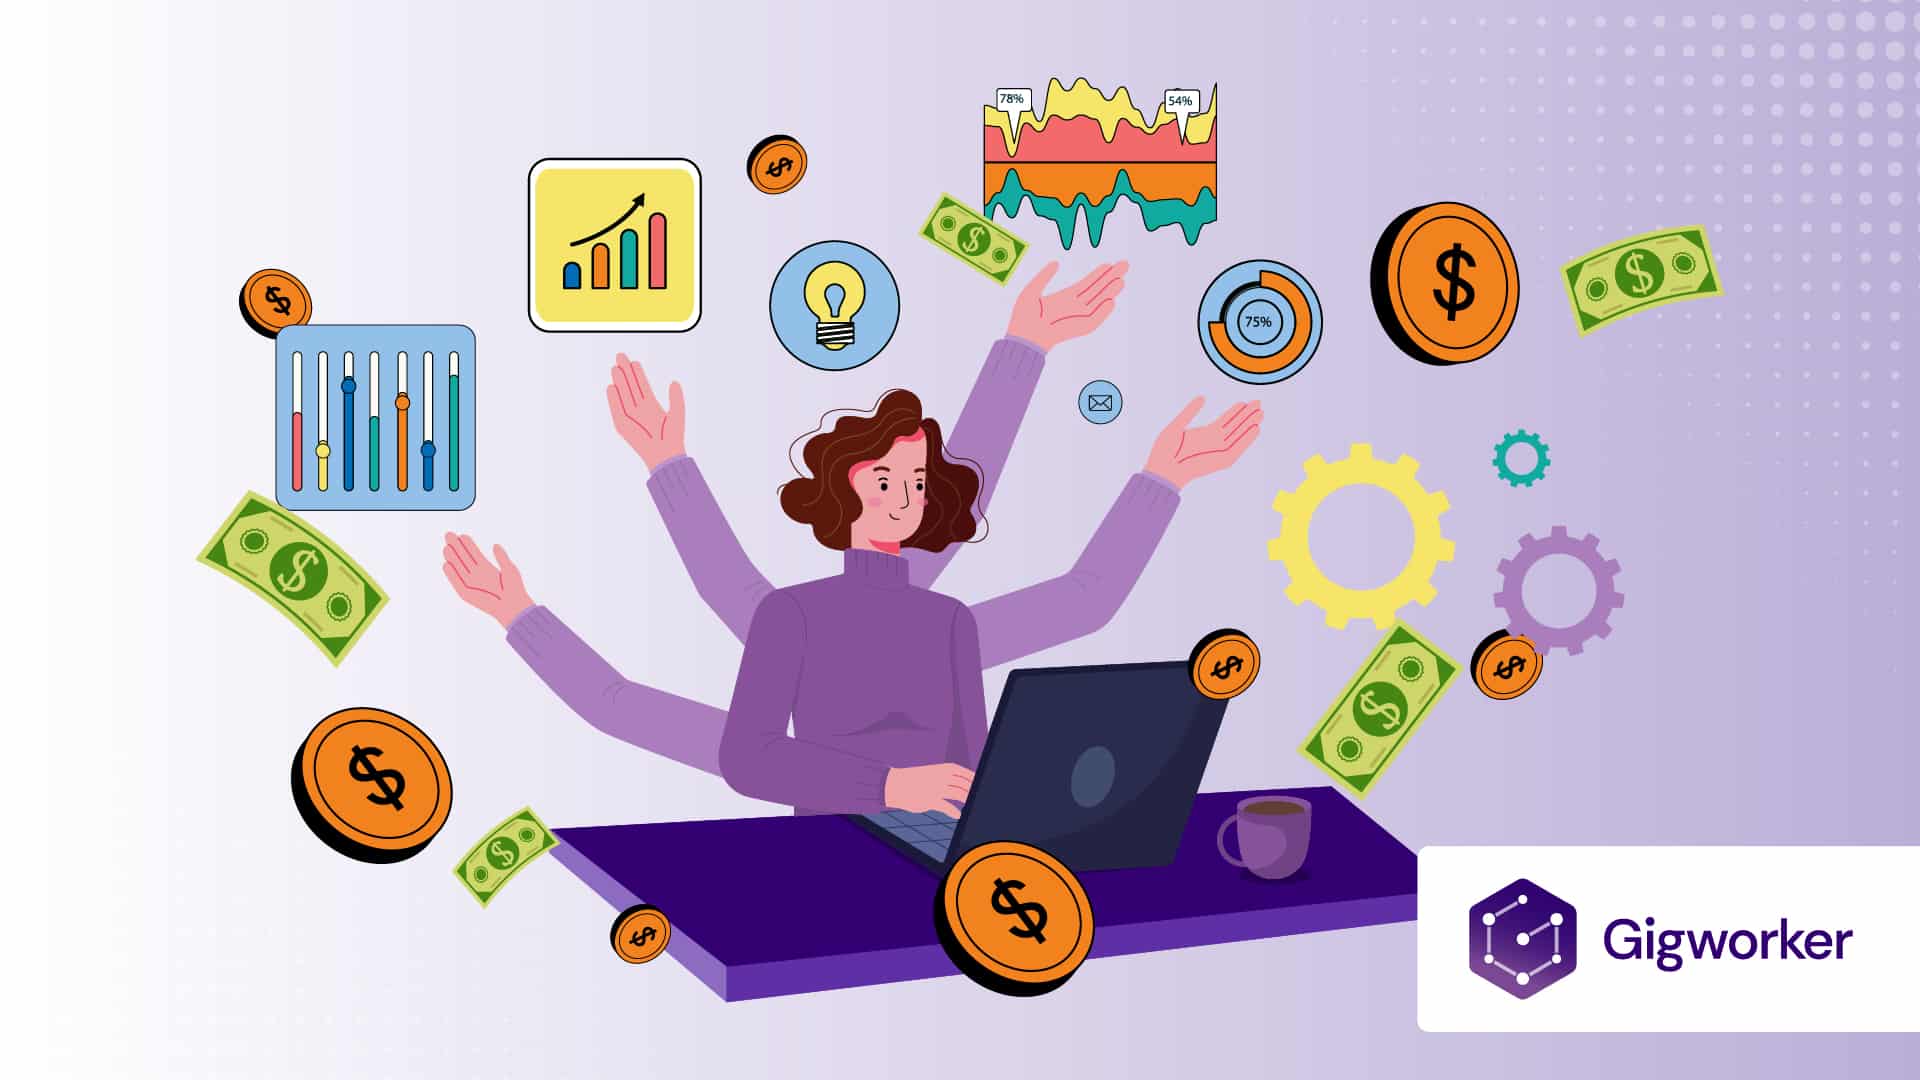 vector graphic showing an illustration of a lady working on a laptop with many hands receiving money graphics related to how to make extra income while working full time